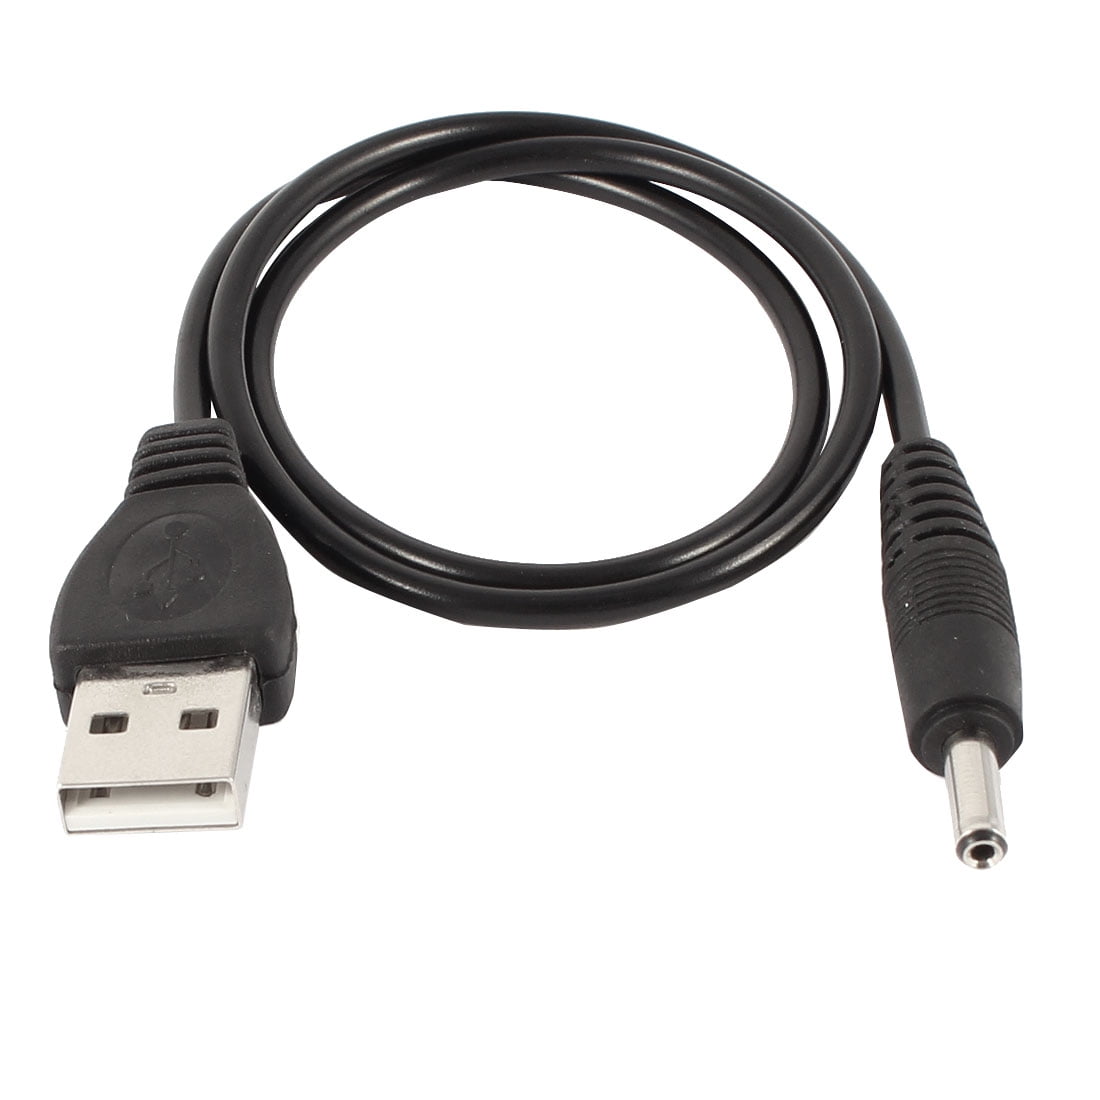 1.35 mm 5 Volt DC Barrel Jack Power Cable Adapter 80cm USB to DC 3.5mm 